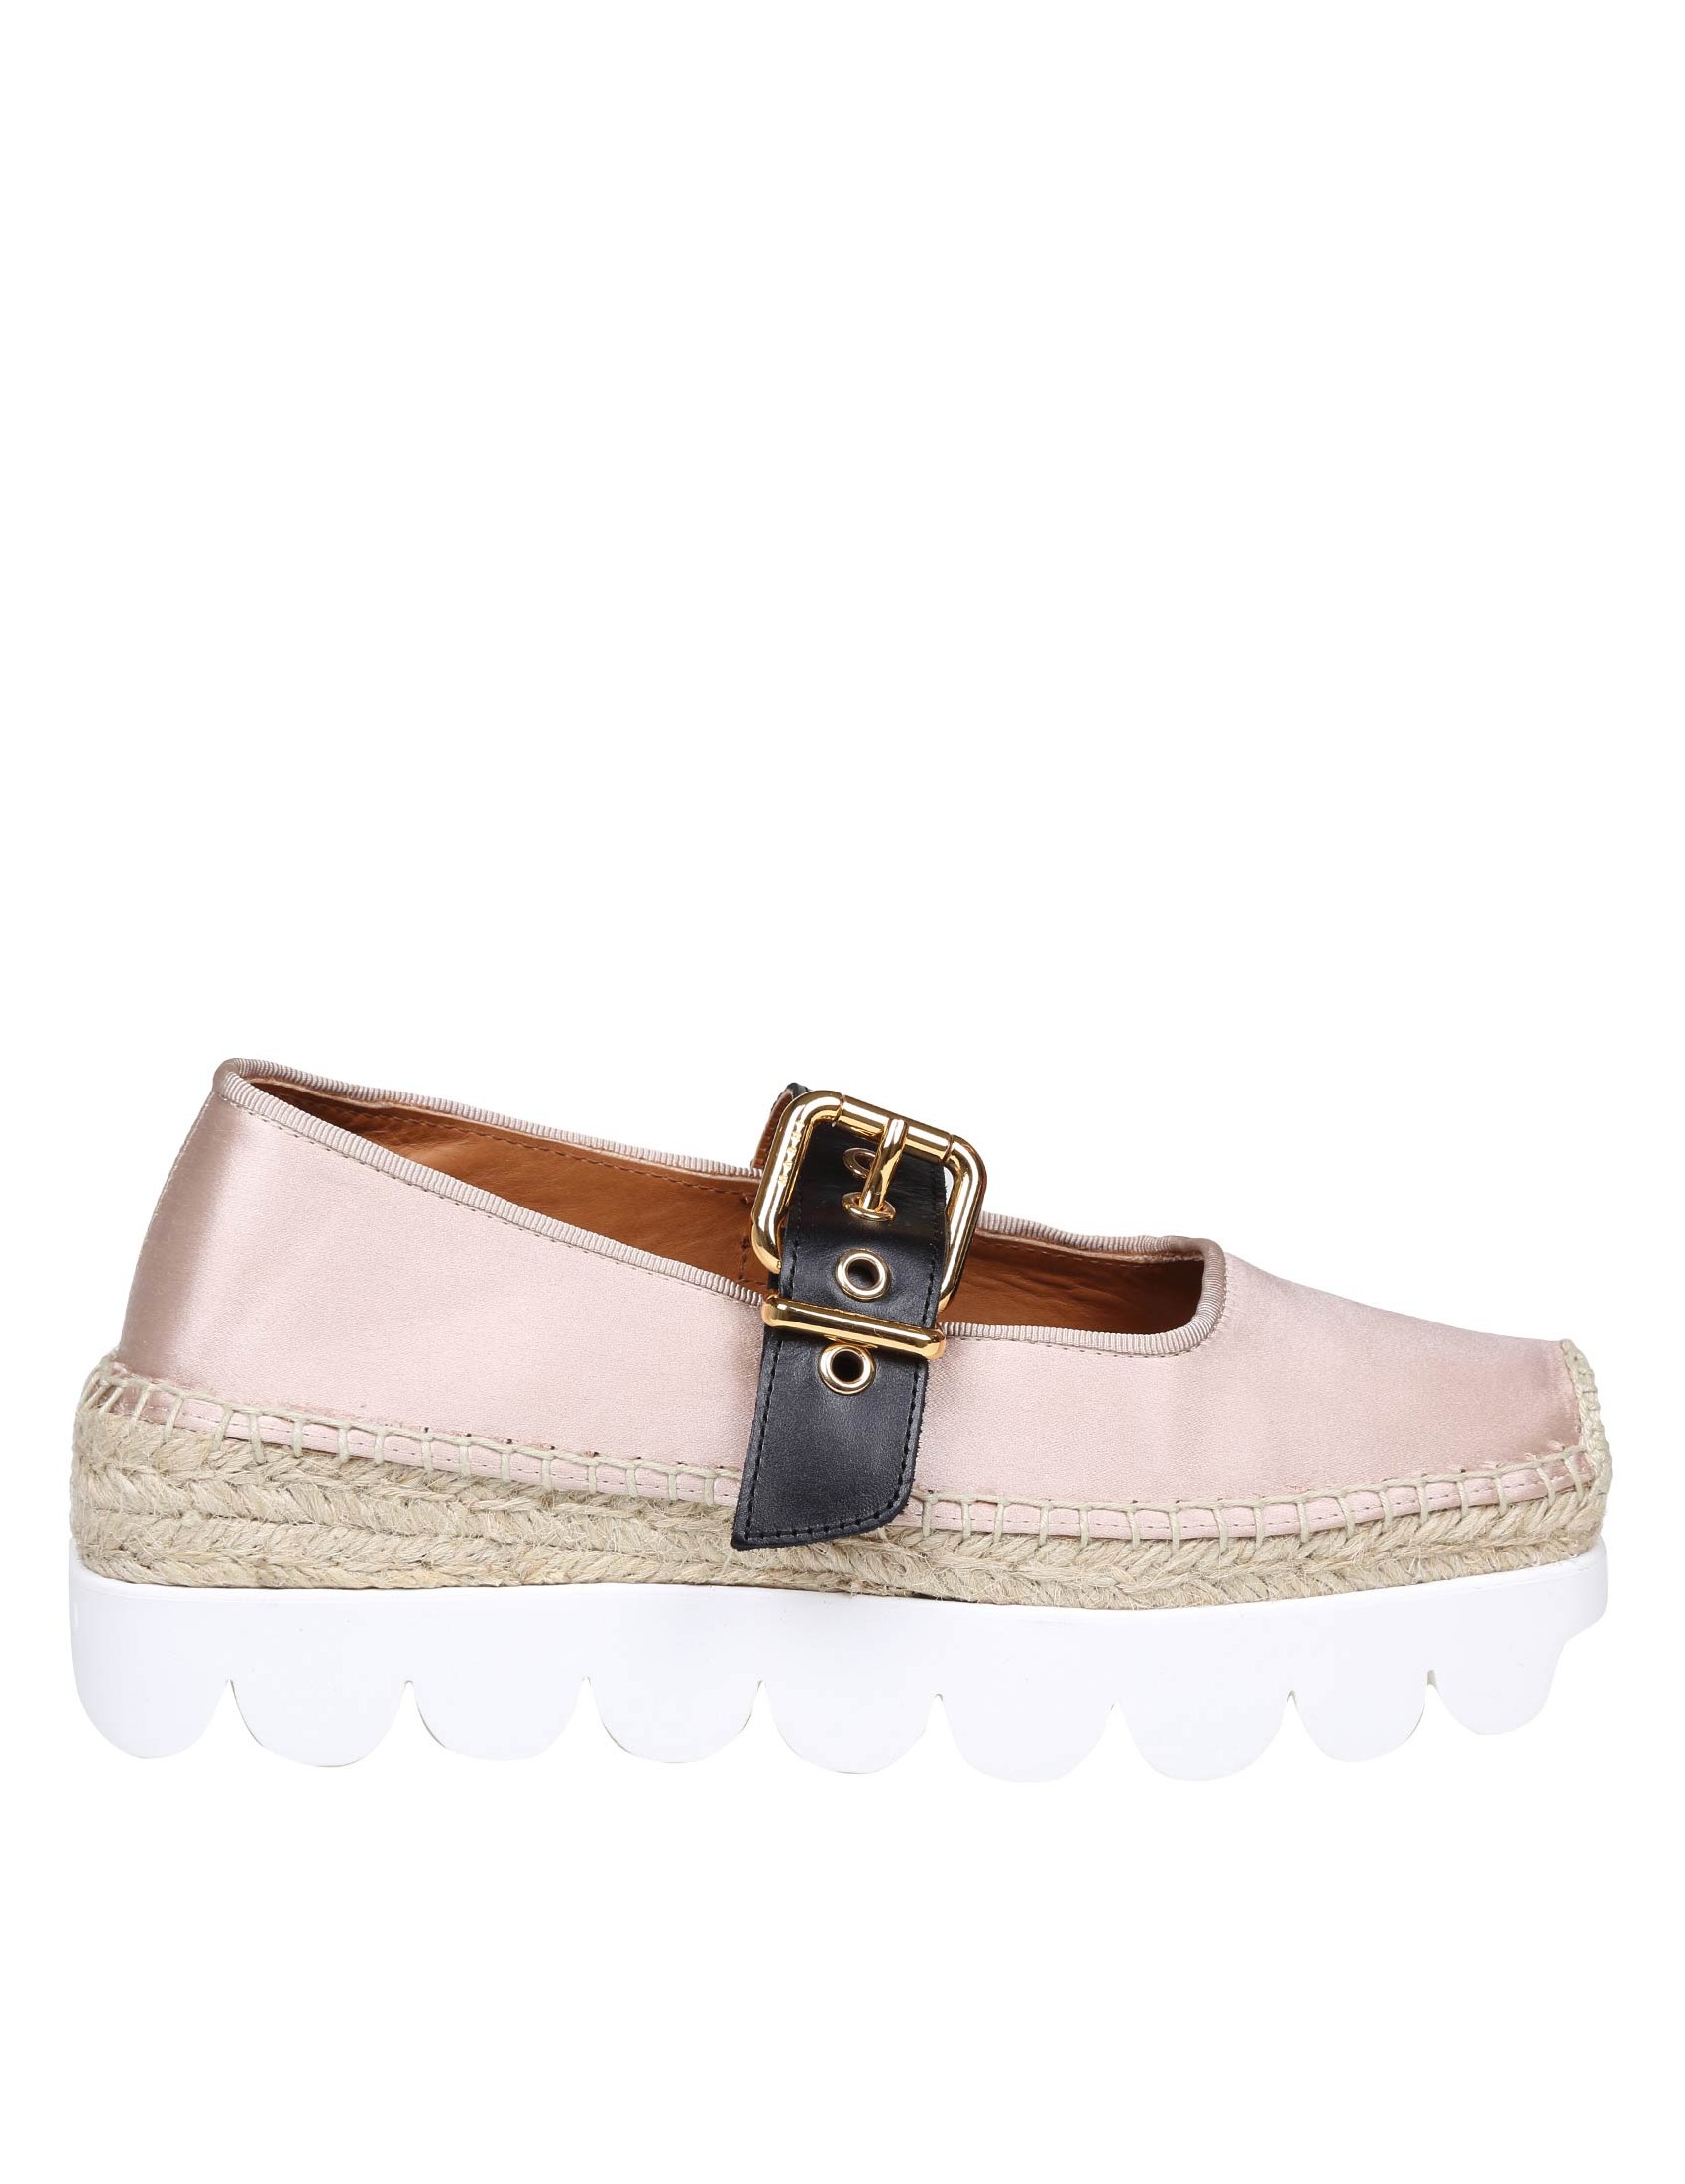 MARNI MARY JANE SHOE COLOR PINK